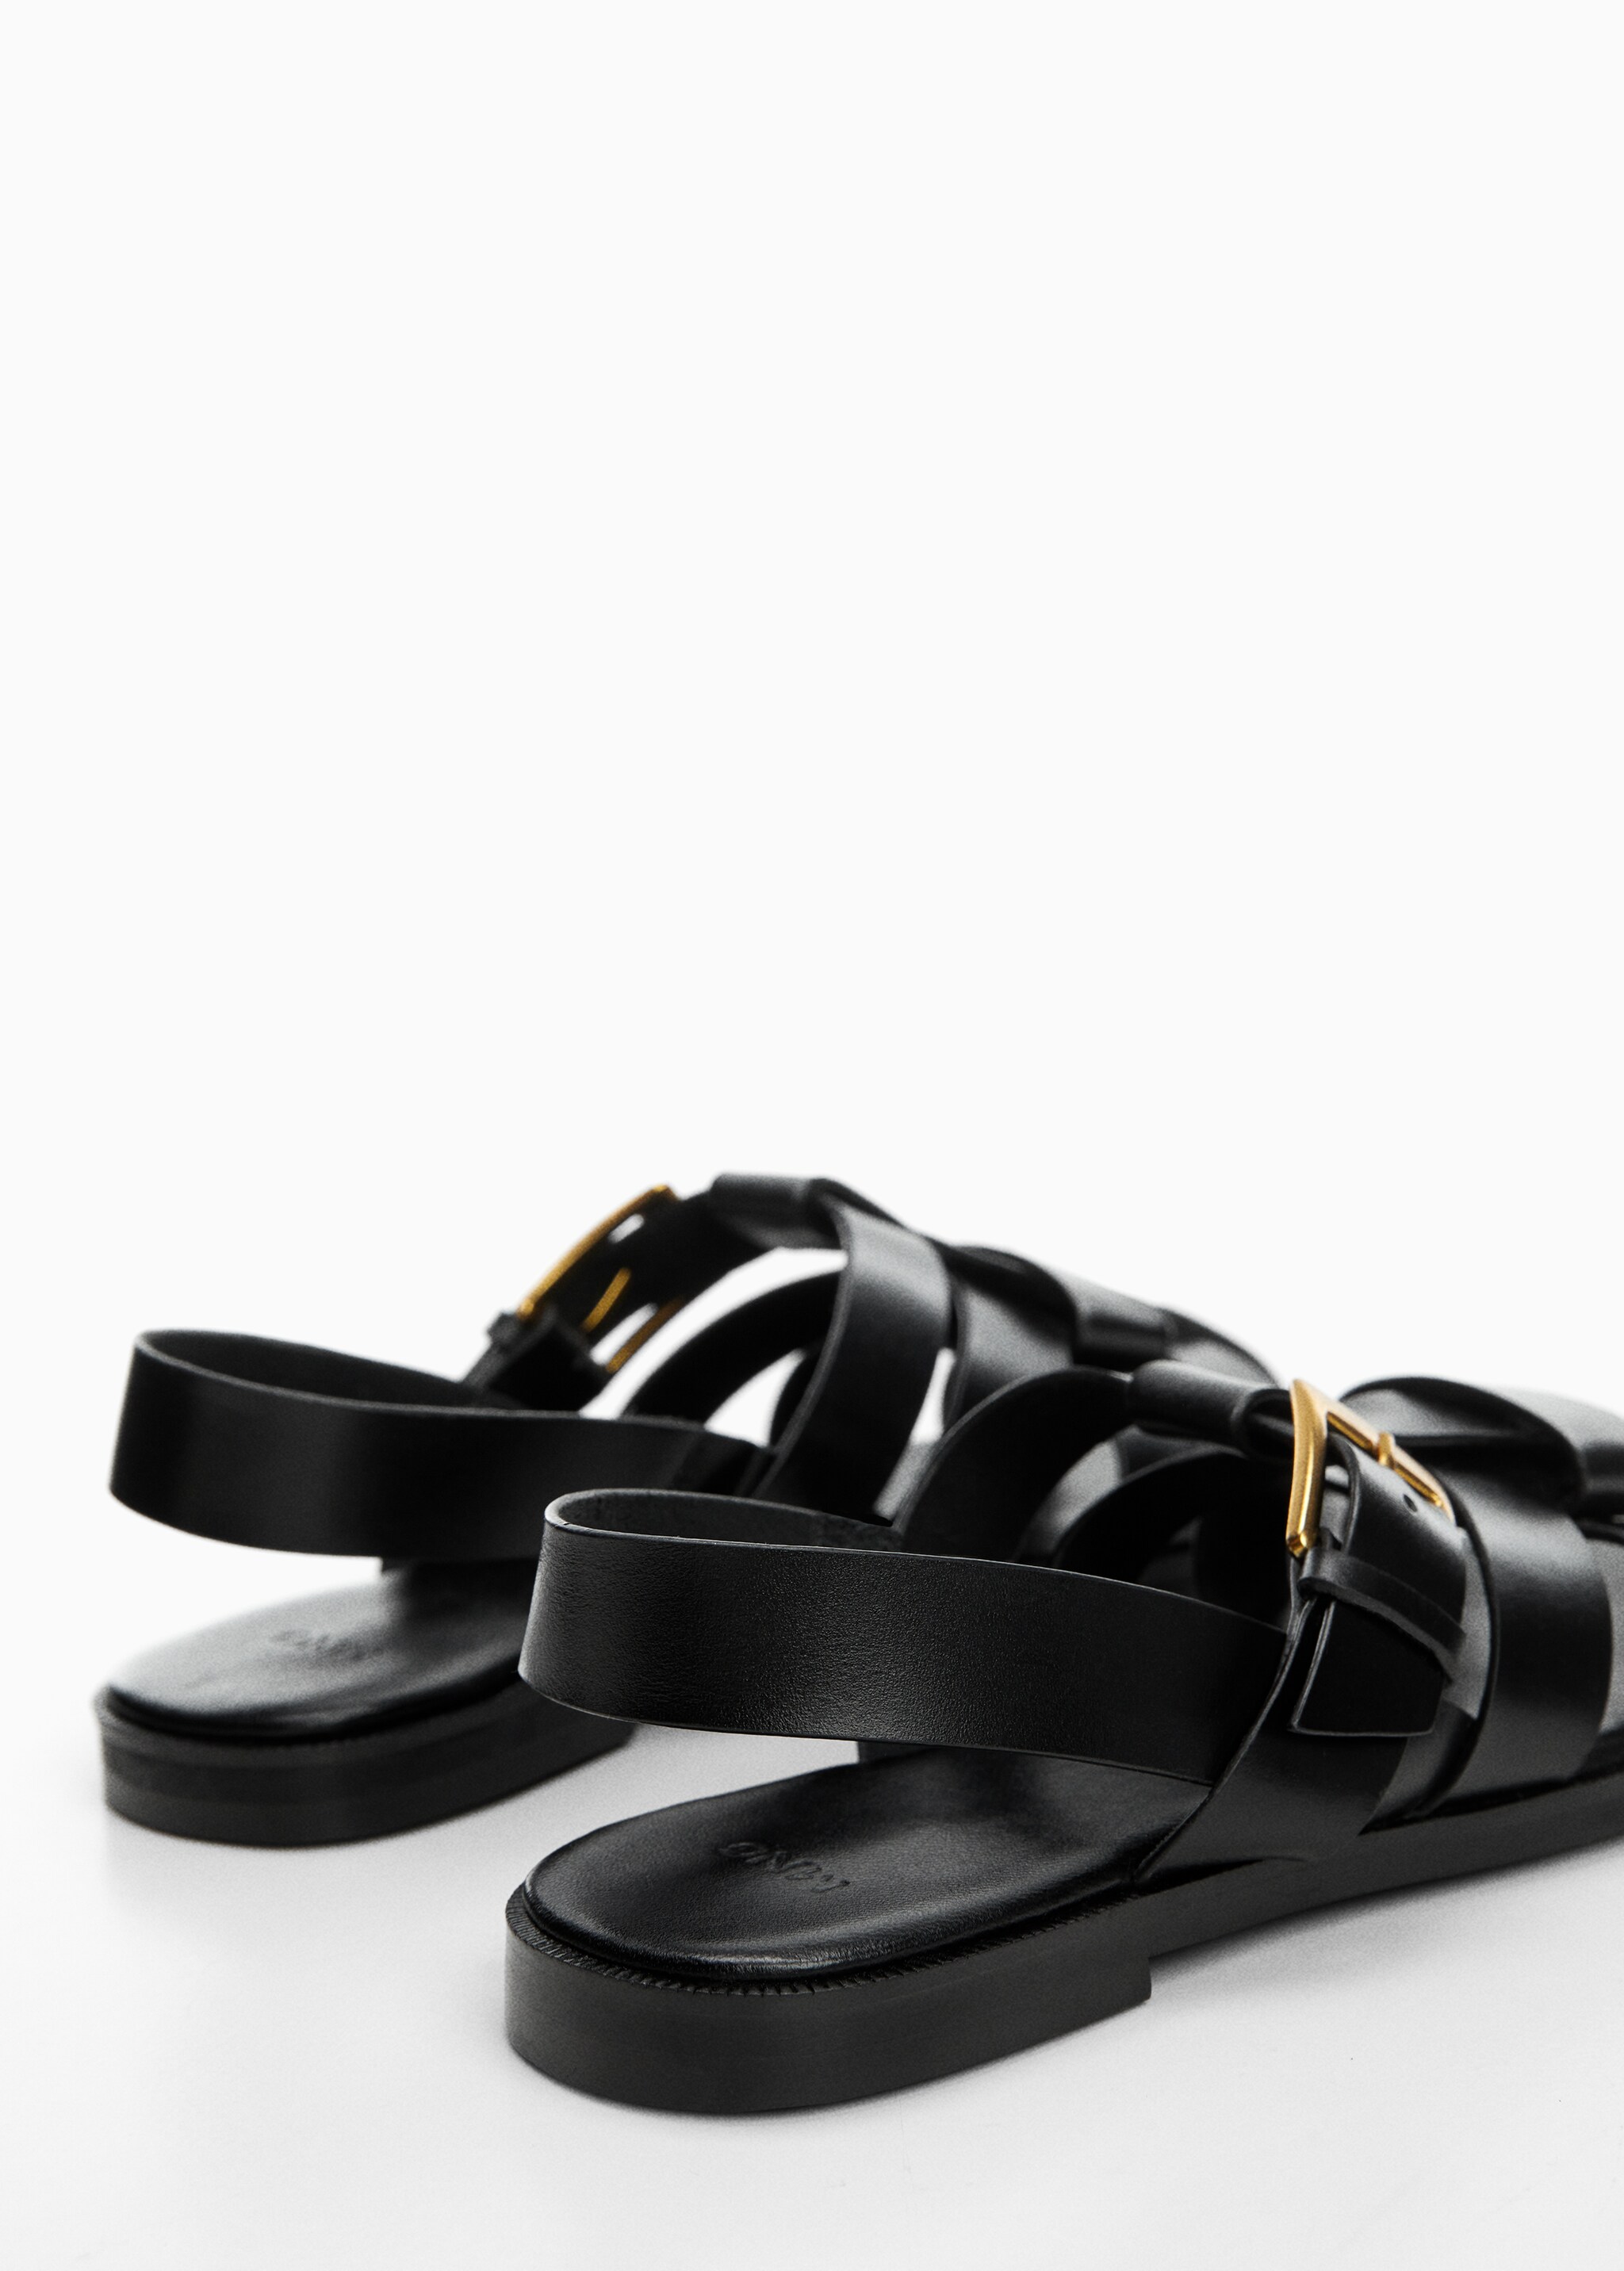 Fisherman sandal - Details of the article 1